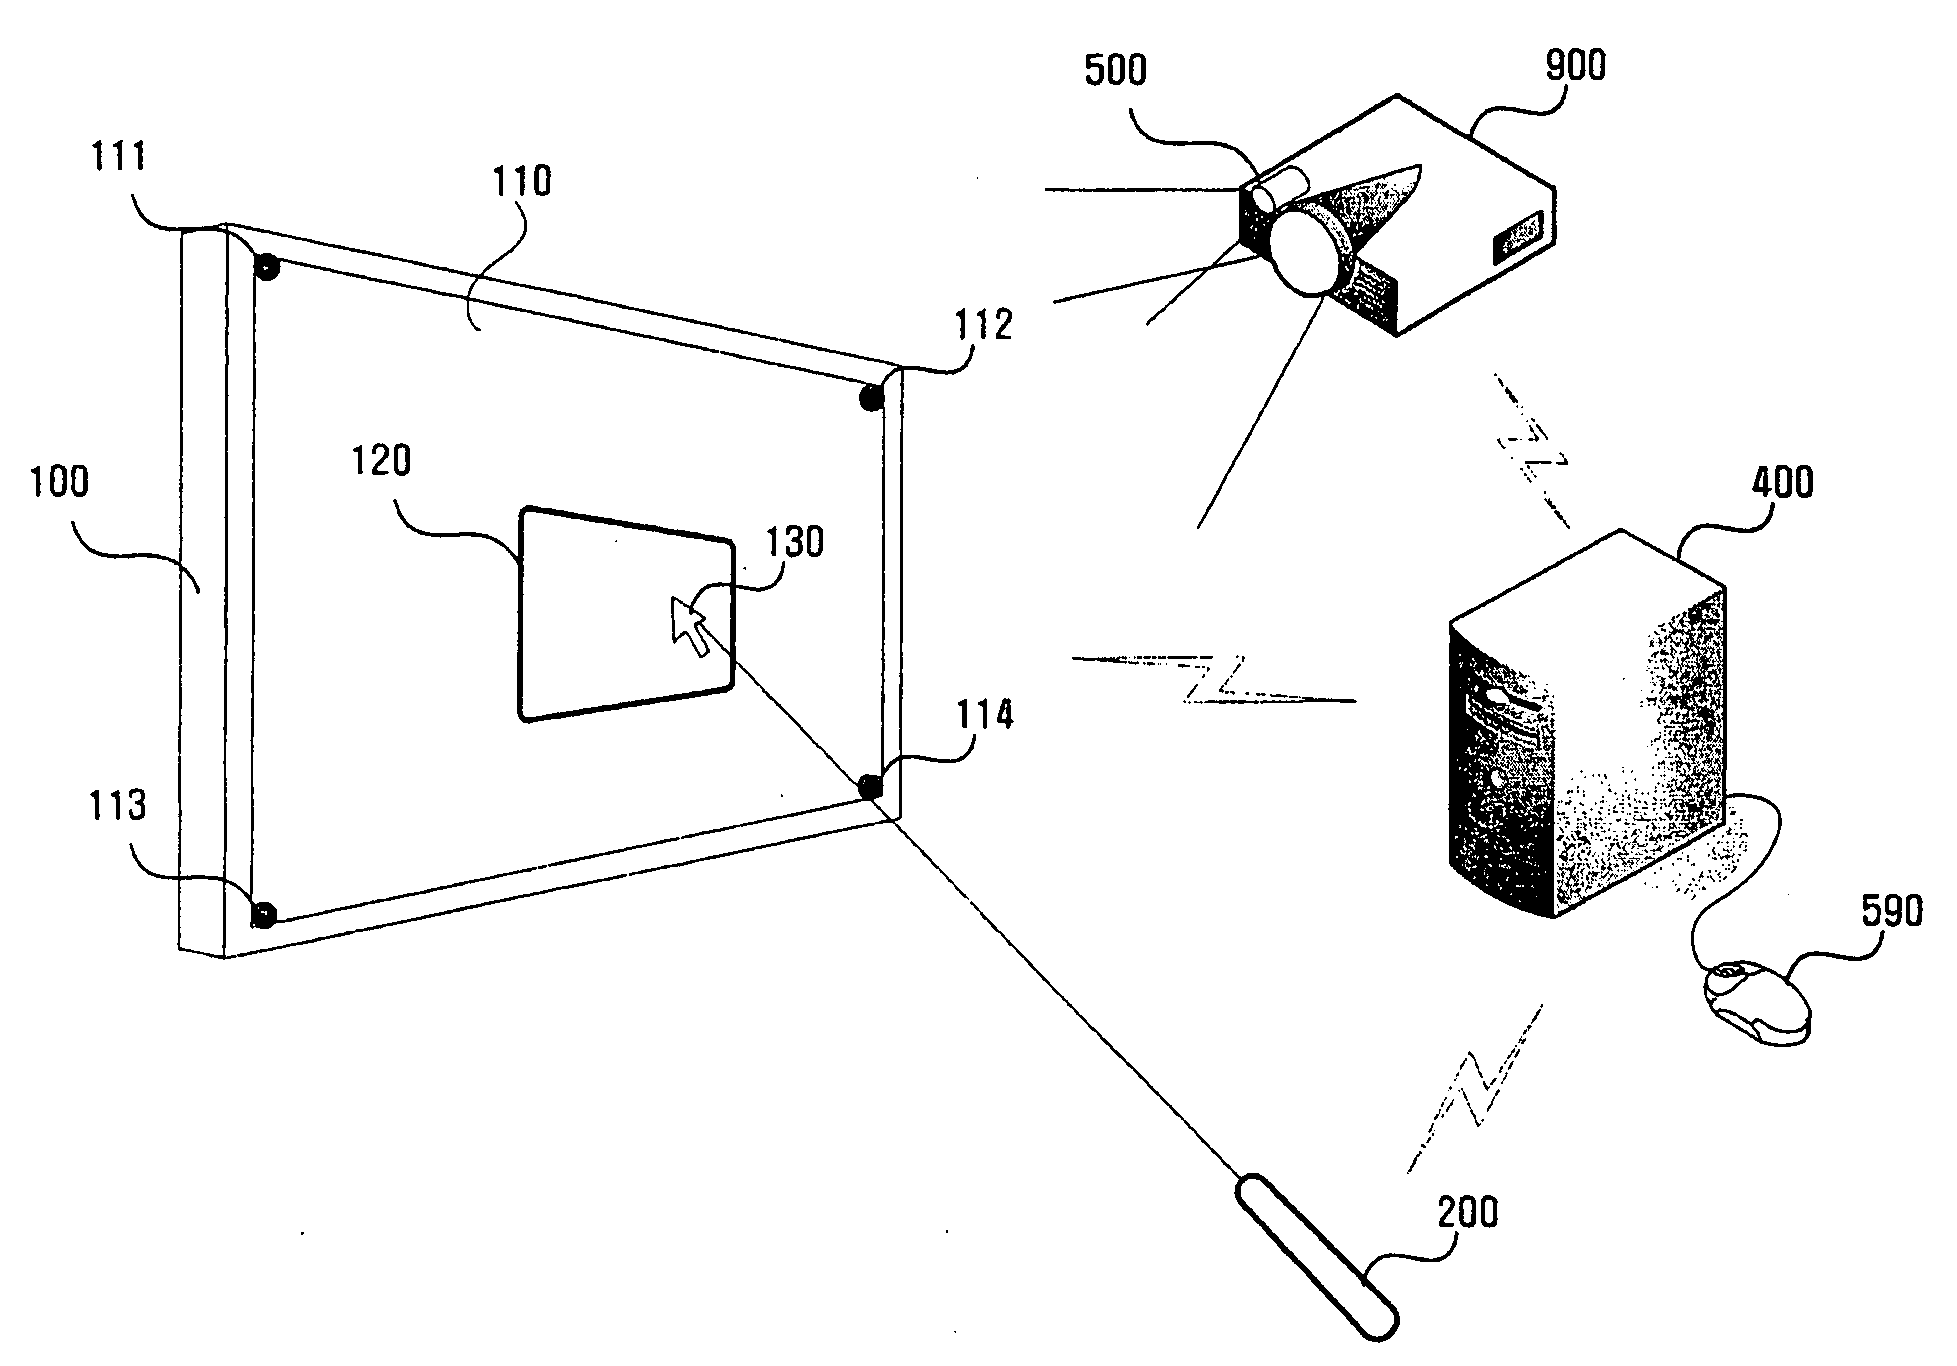 Pointing input device, method, and system using image pattern